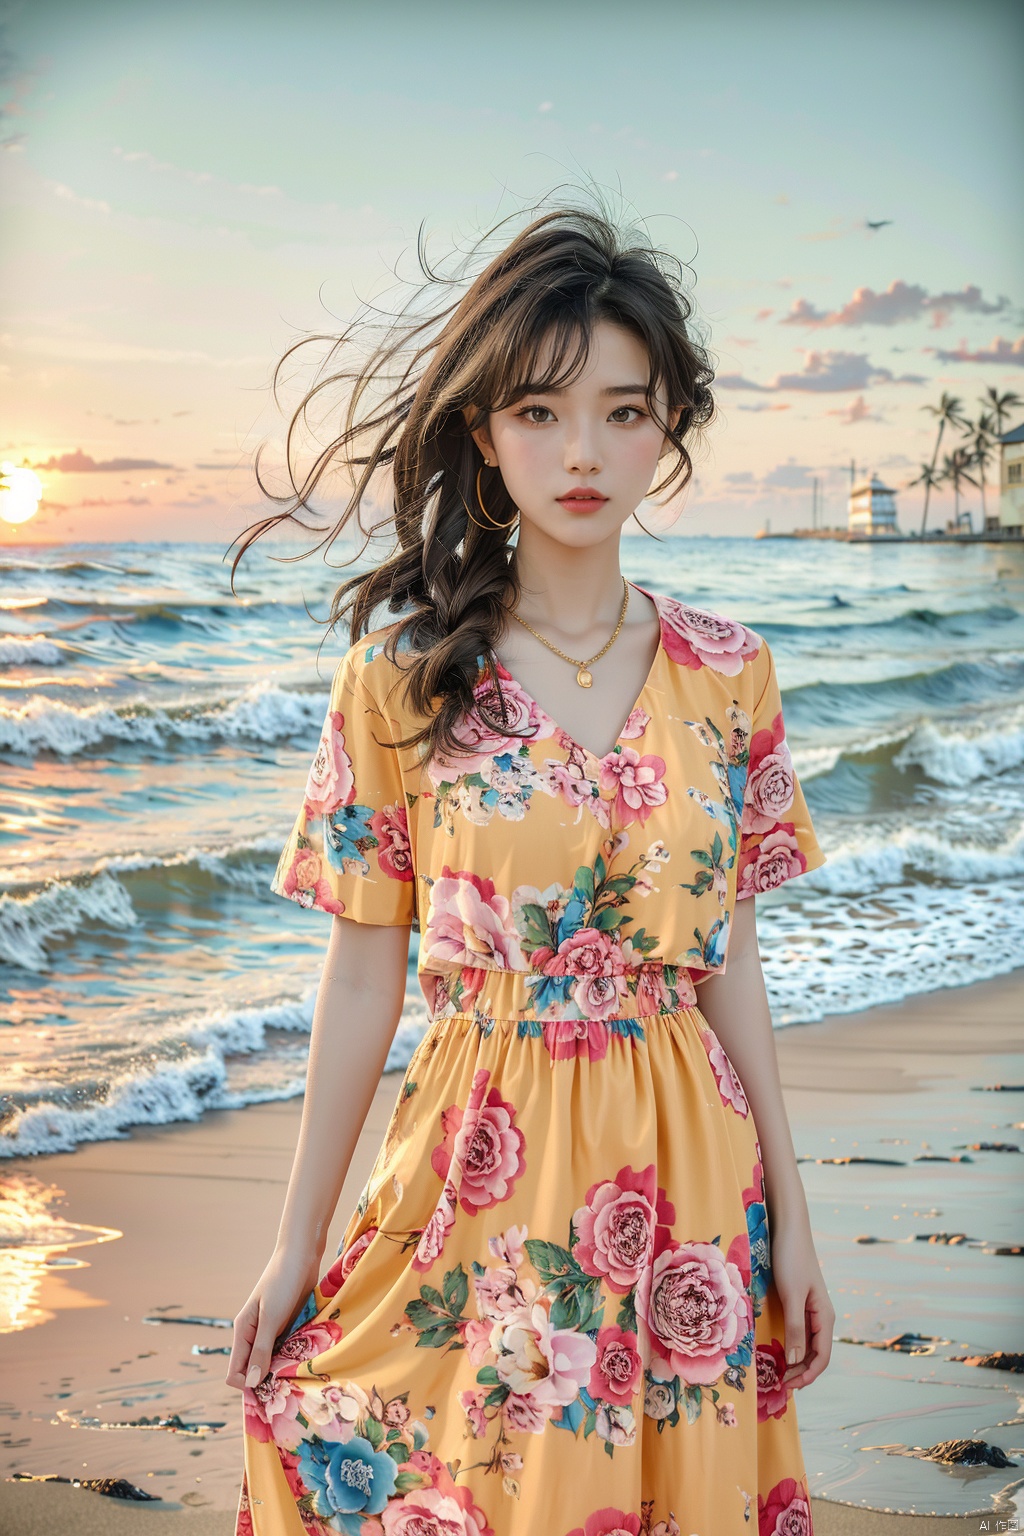  ((masterpiece)), ((best quality)), 8k, high detailed, ultra-detailed, (20-year-old girl), (dress), (strap dress), (on the beach), (solo), (seaside), (sunset), (golden hour), (ocean waves), (sand), (serenity).cuihua, 1 girl, 80sDBA style